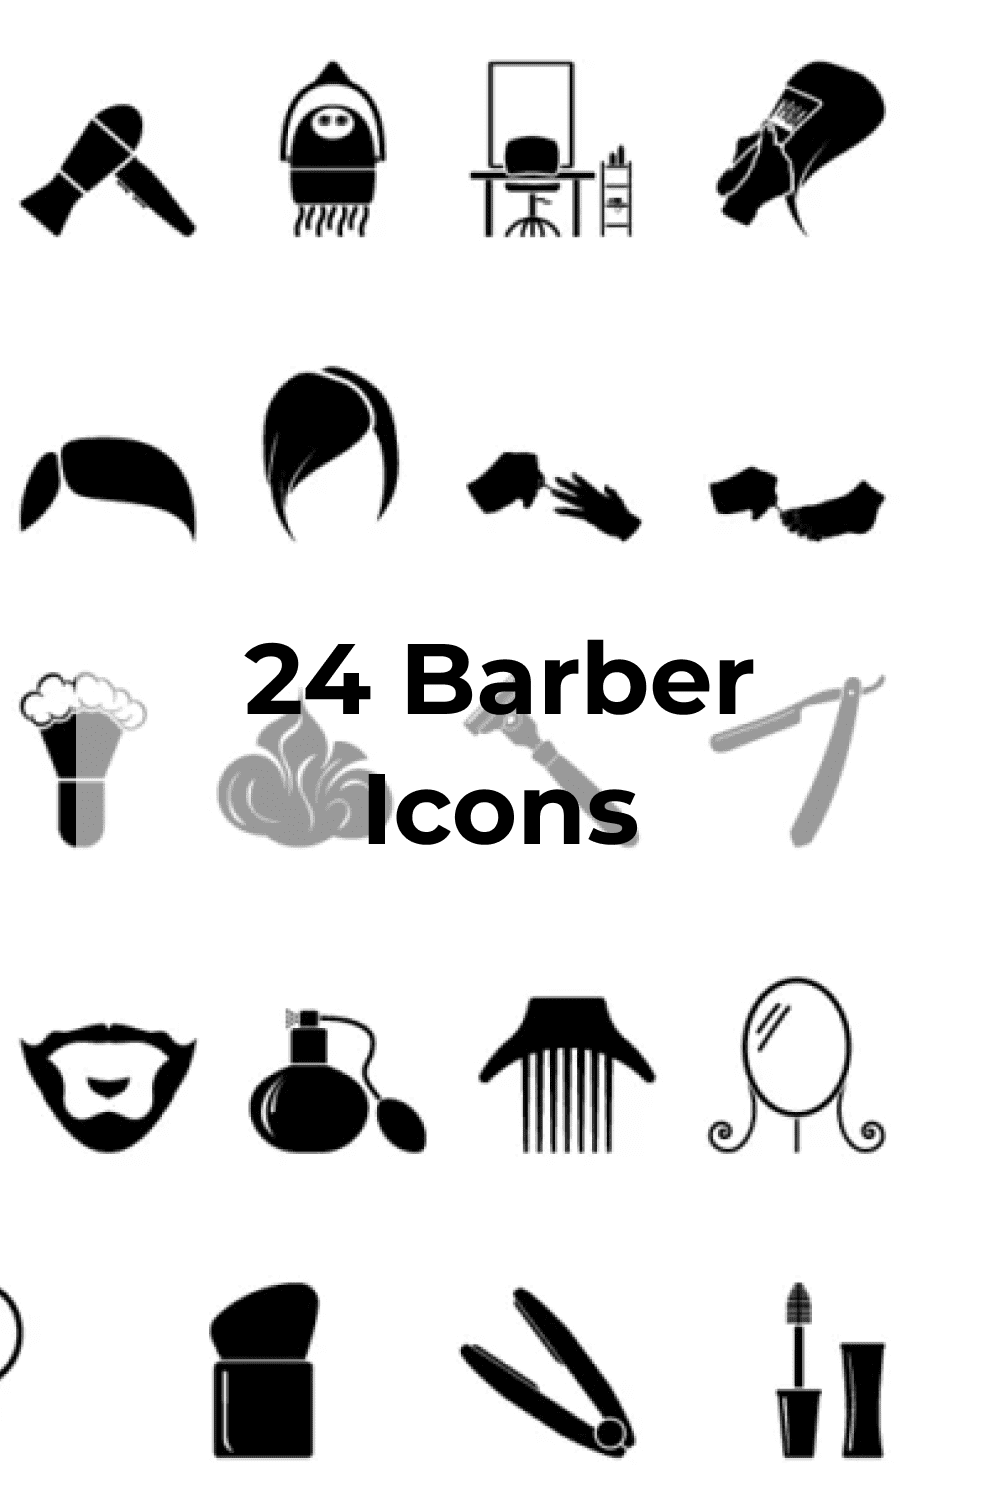 Use these creative icons for decorating your topic.